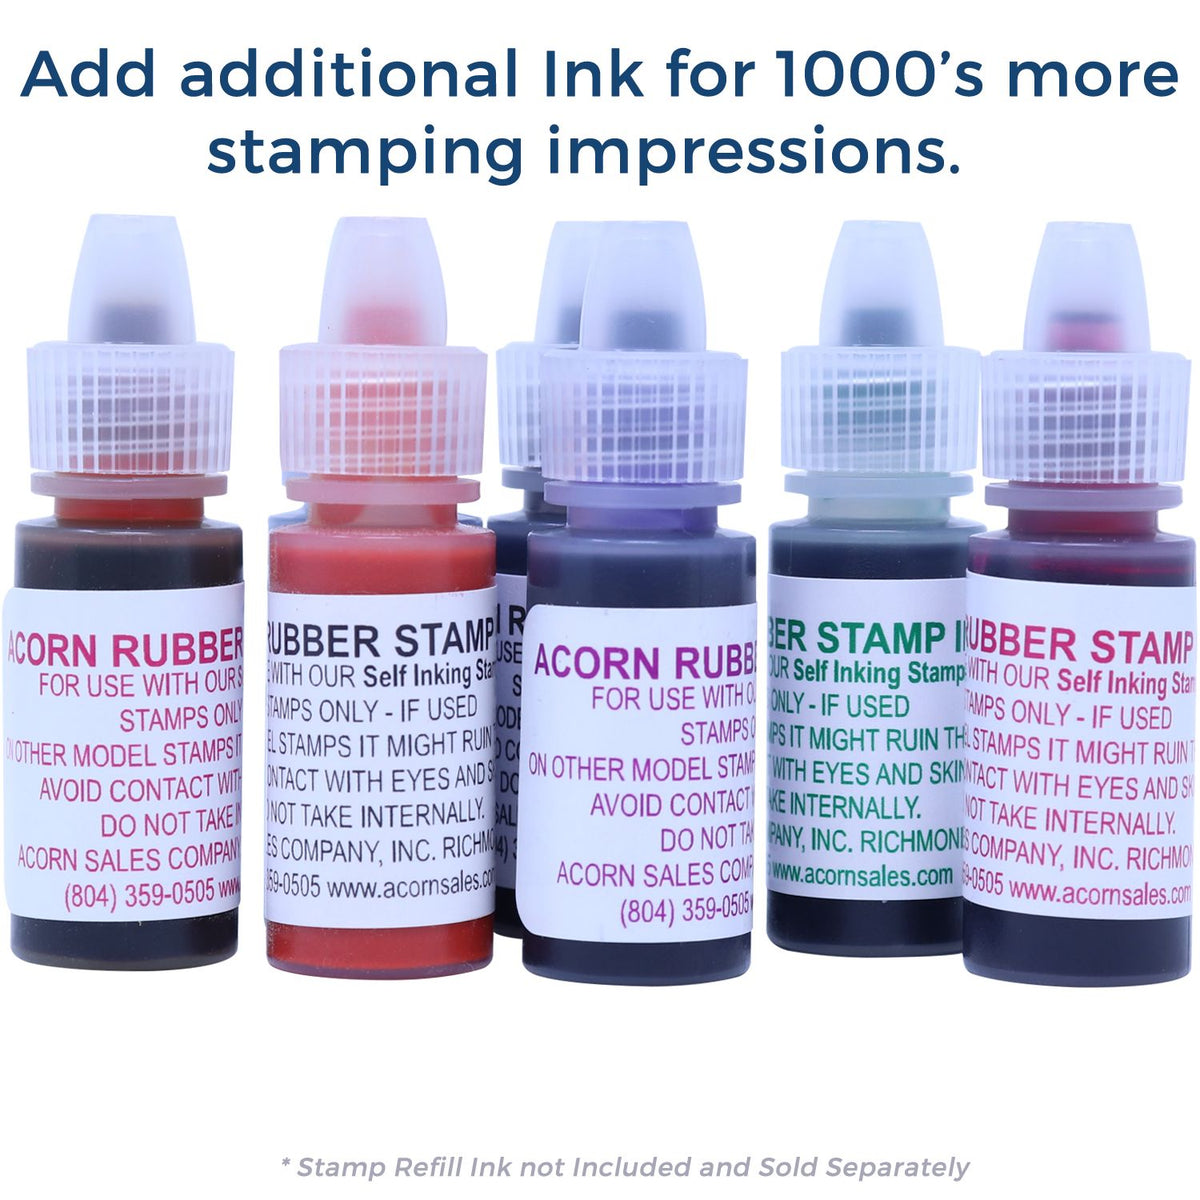 Refill Ink for Self-Inking Round Brilliant Stamp Available